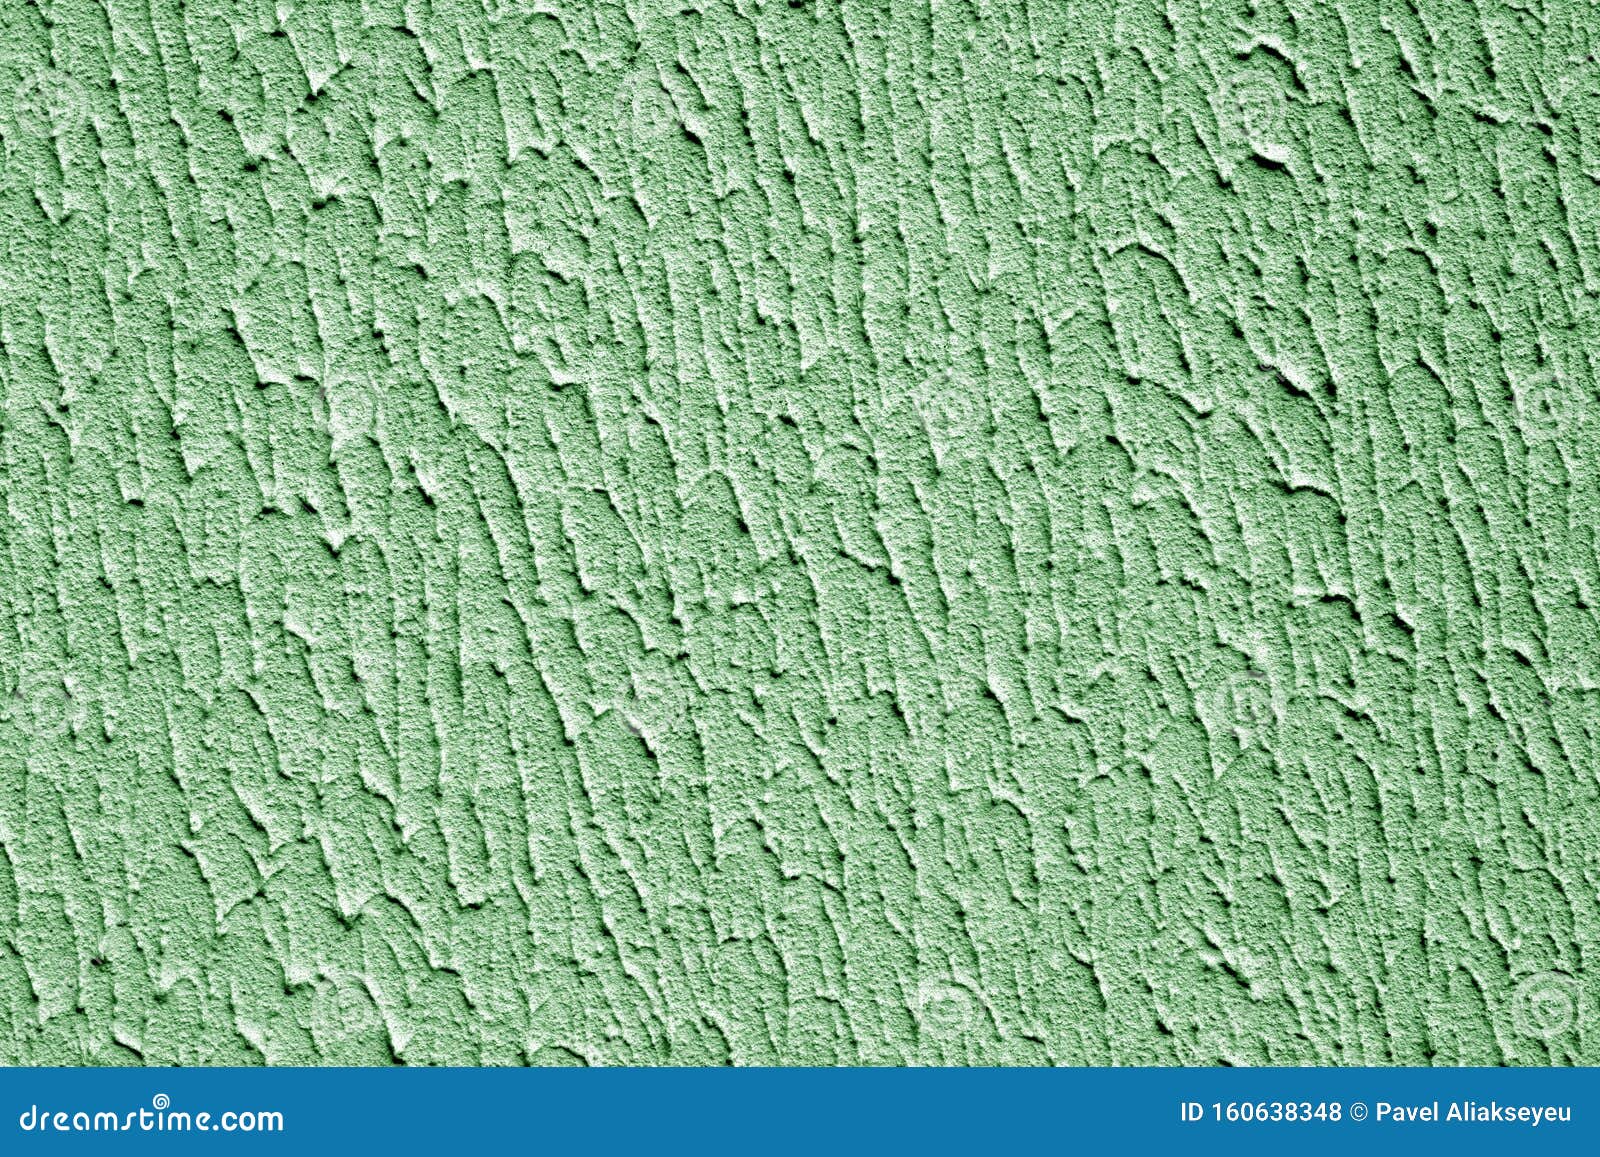 Plaster Wall Texture With Interesting Pattern In Green Color Stock